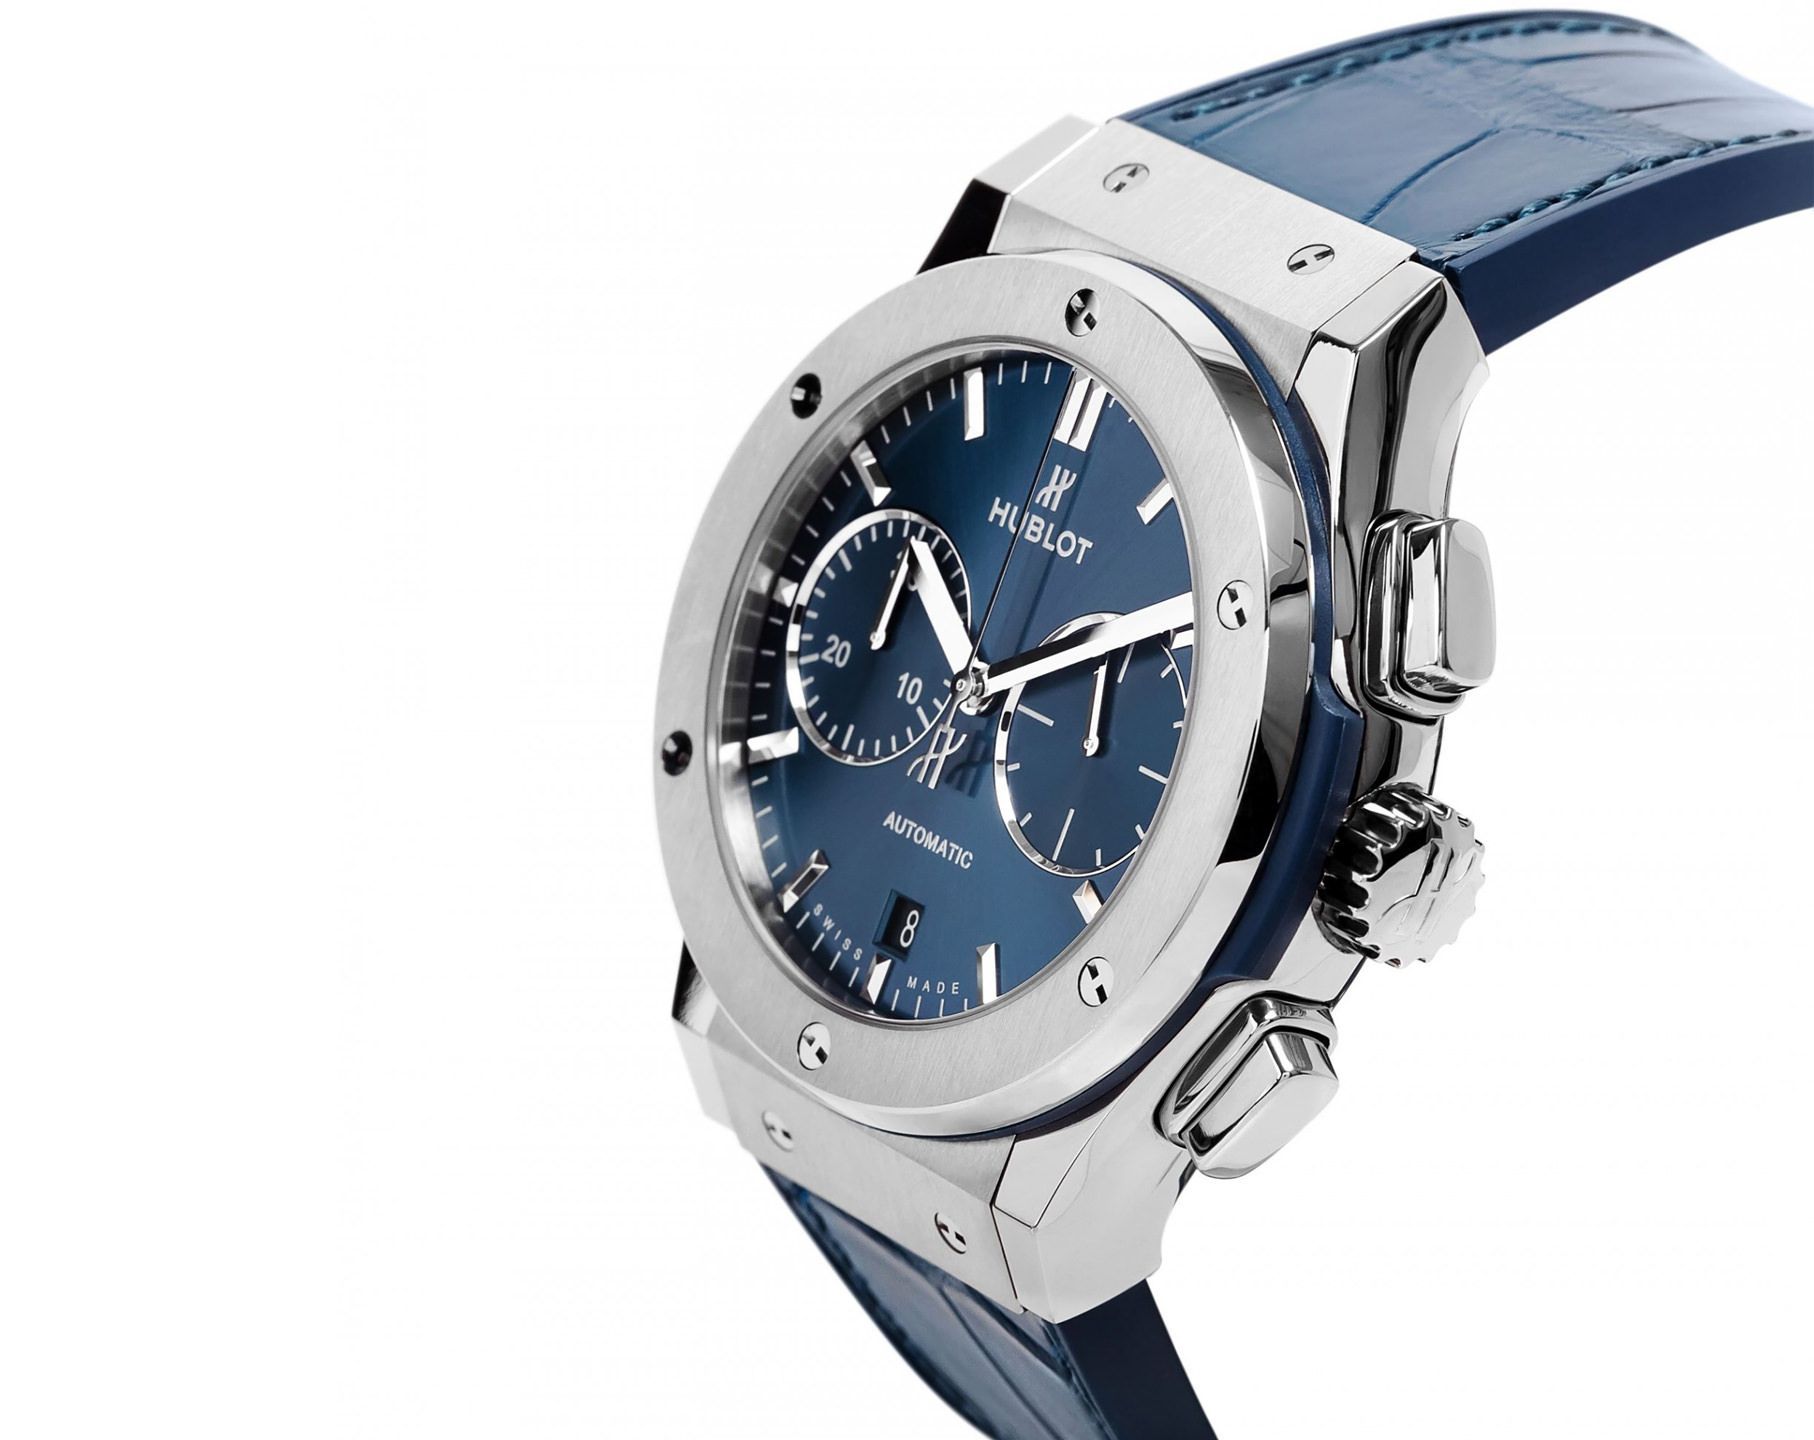 Hublot Chronograph 45 mm Watch in Blue Dial For Men - 4